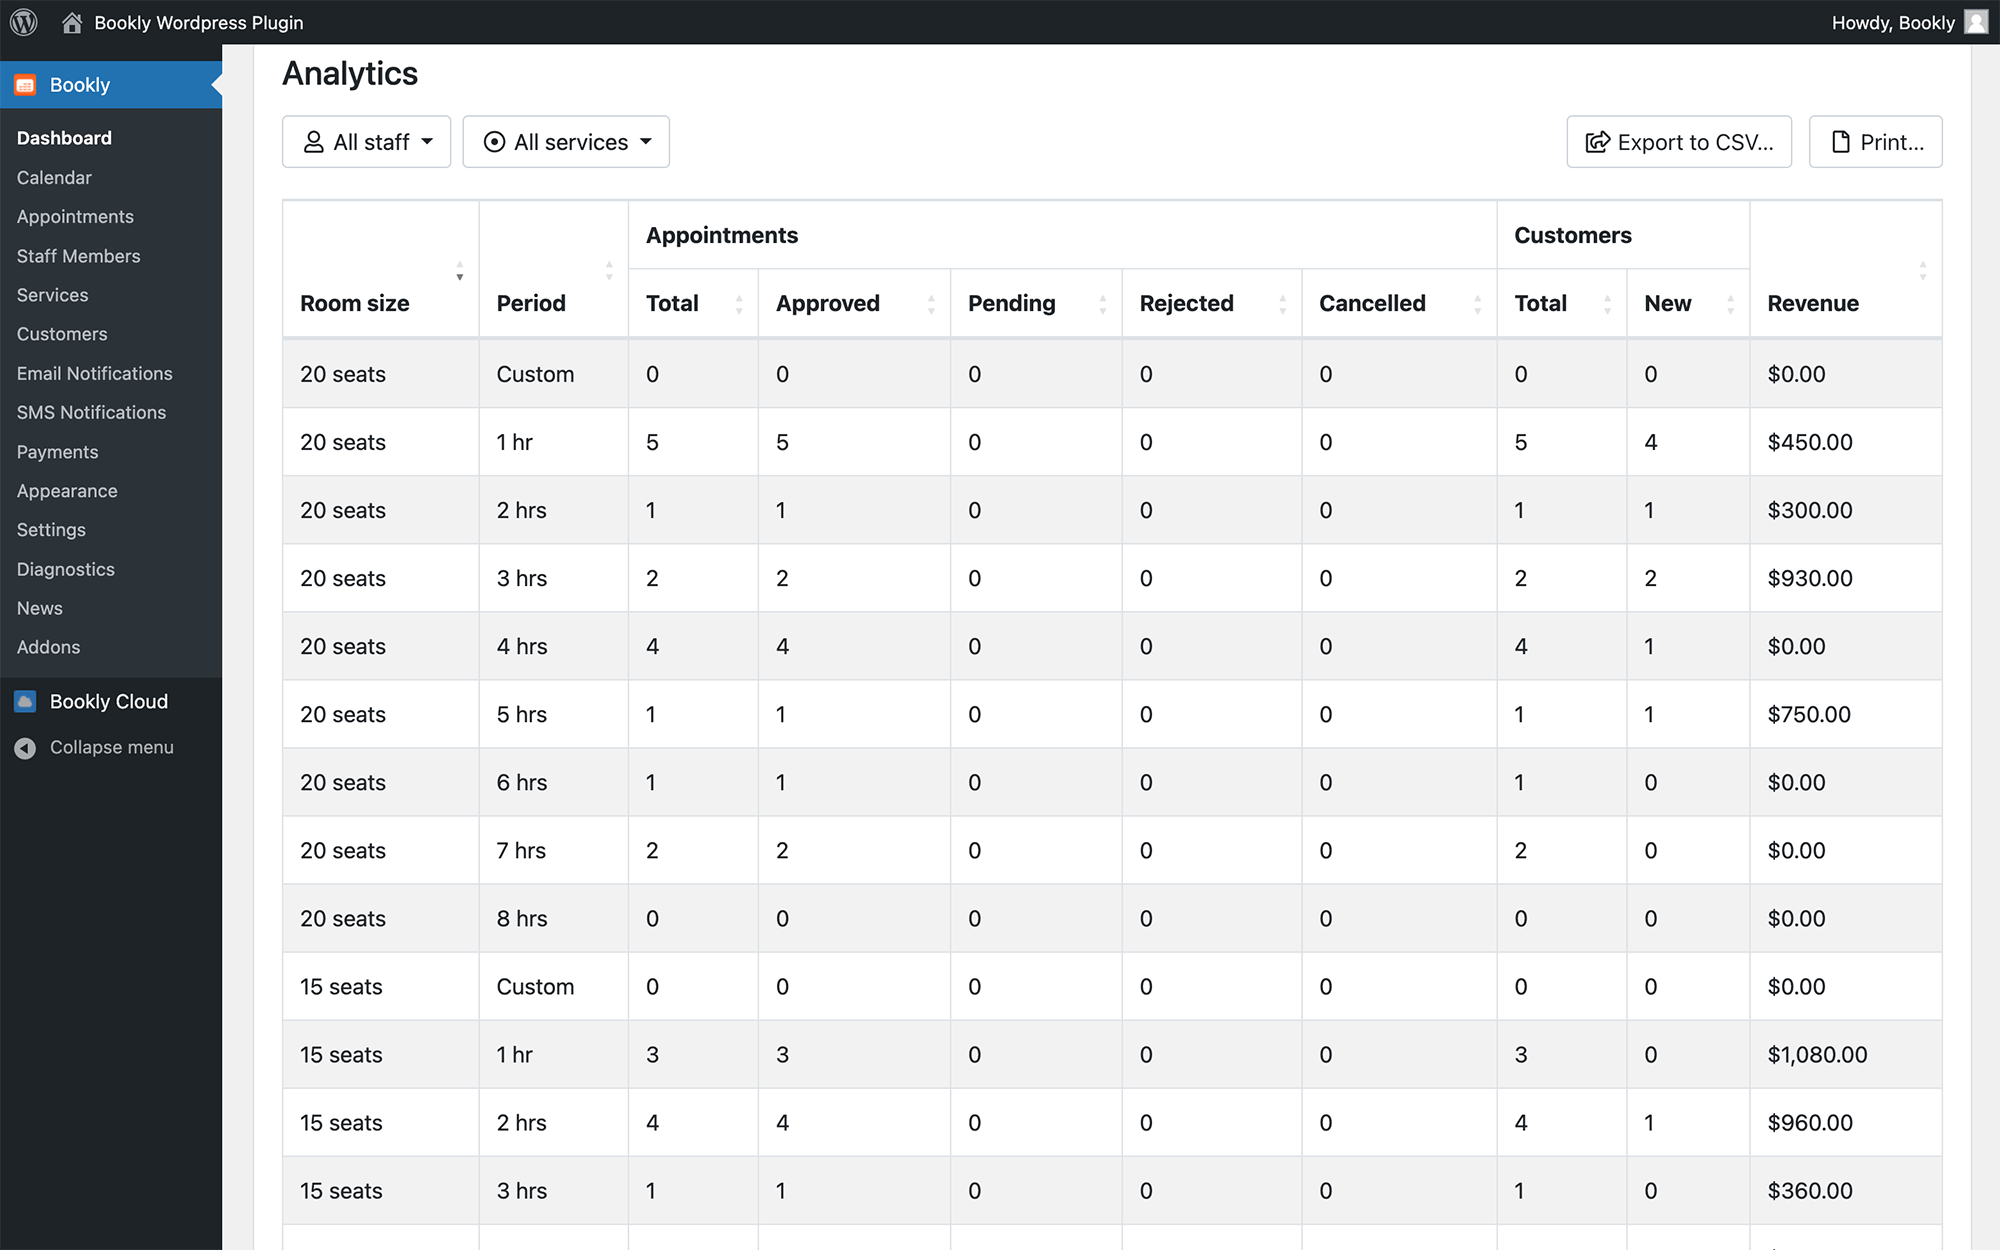 Built-in analytics in Bookly PRO